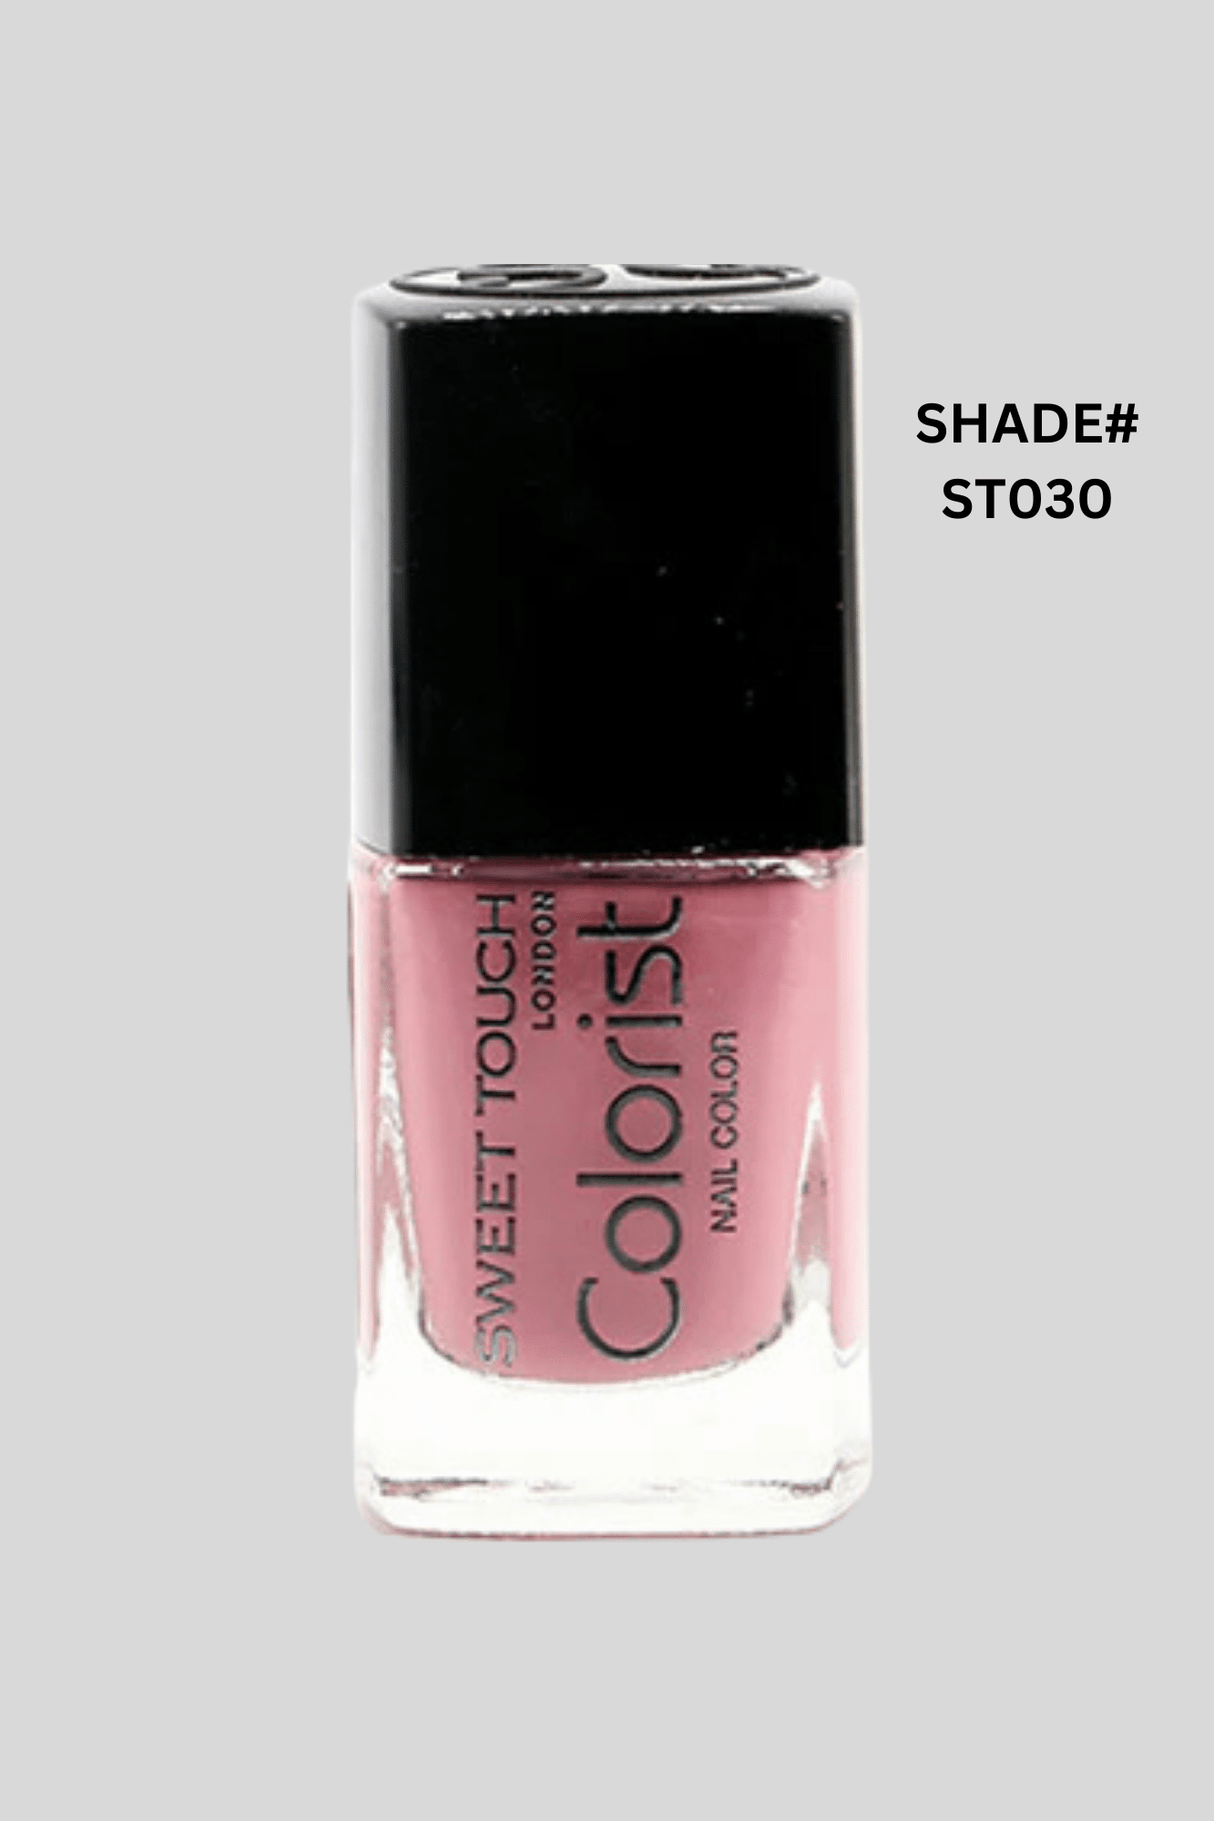 sweet touch nail polish colorist st030 12ml